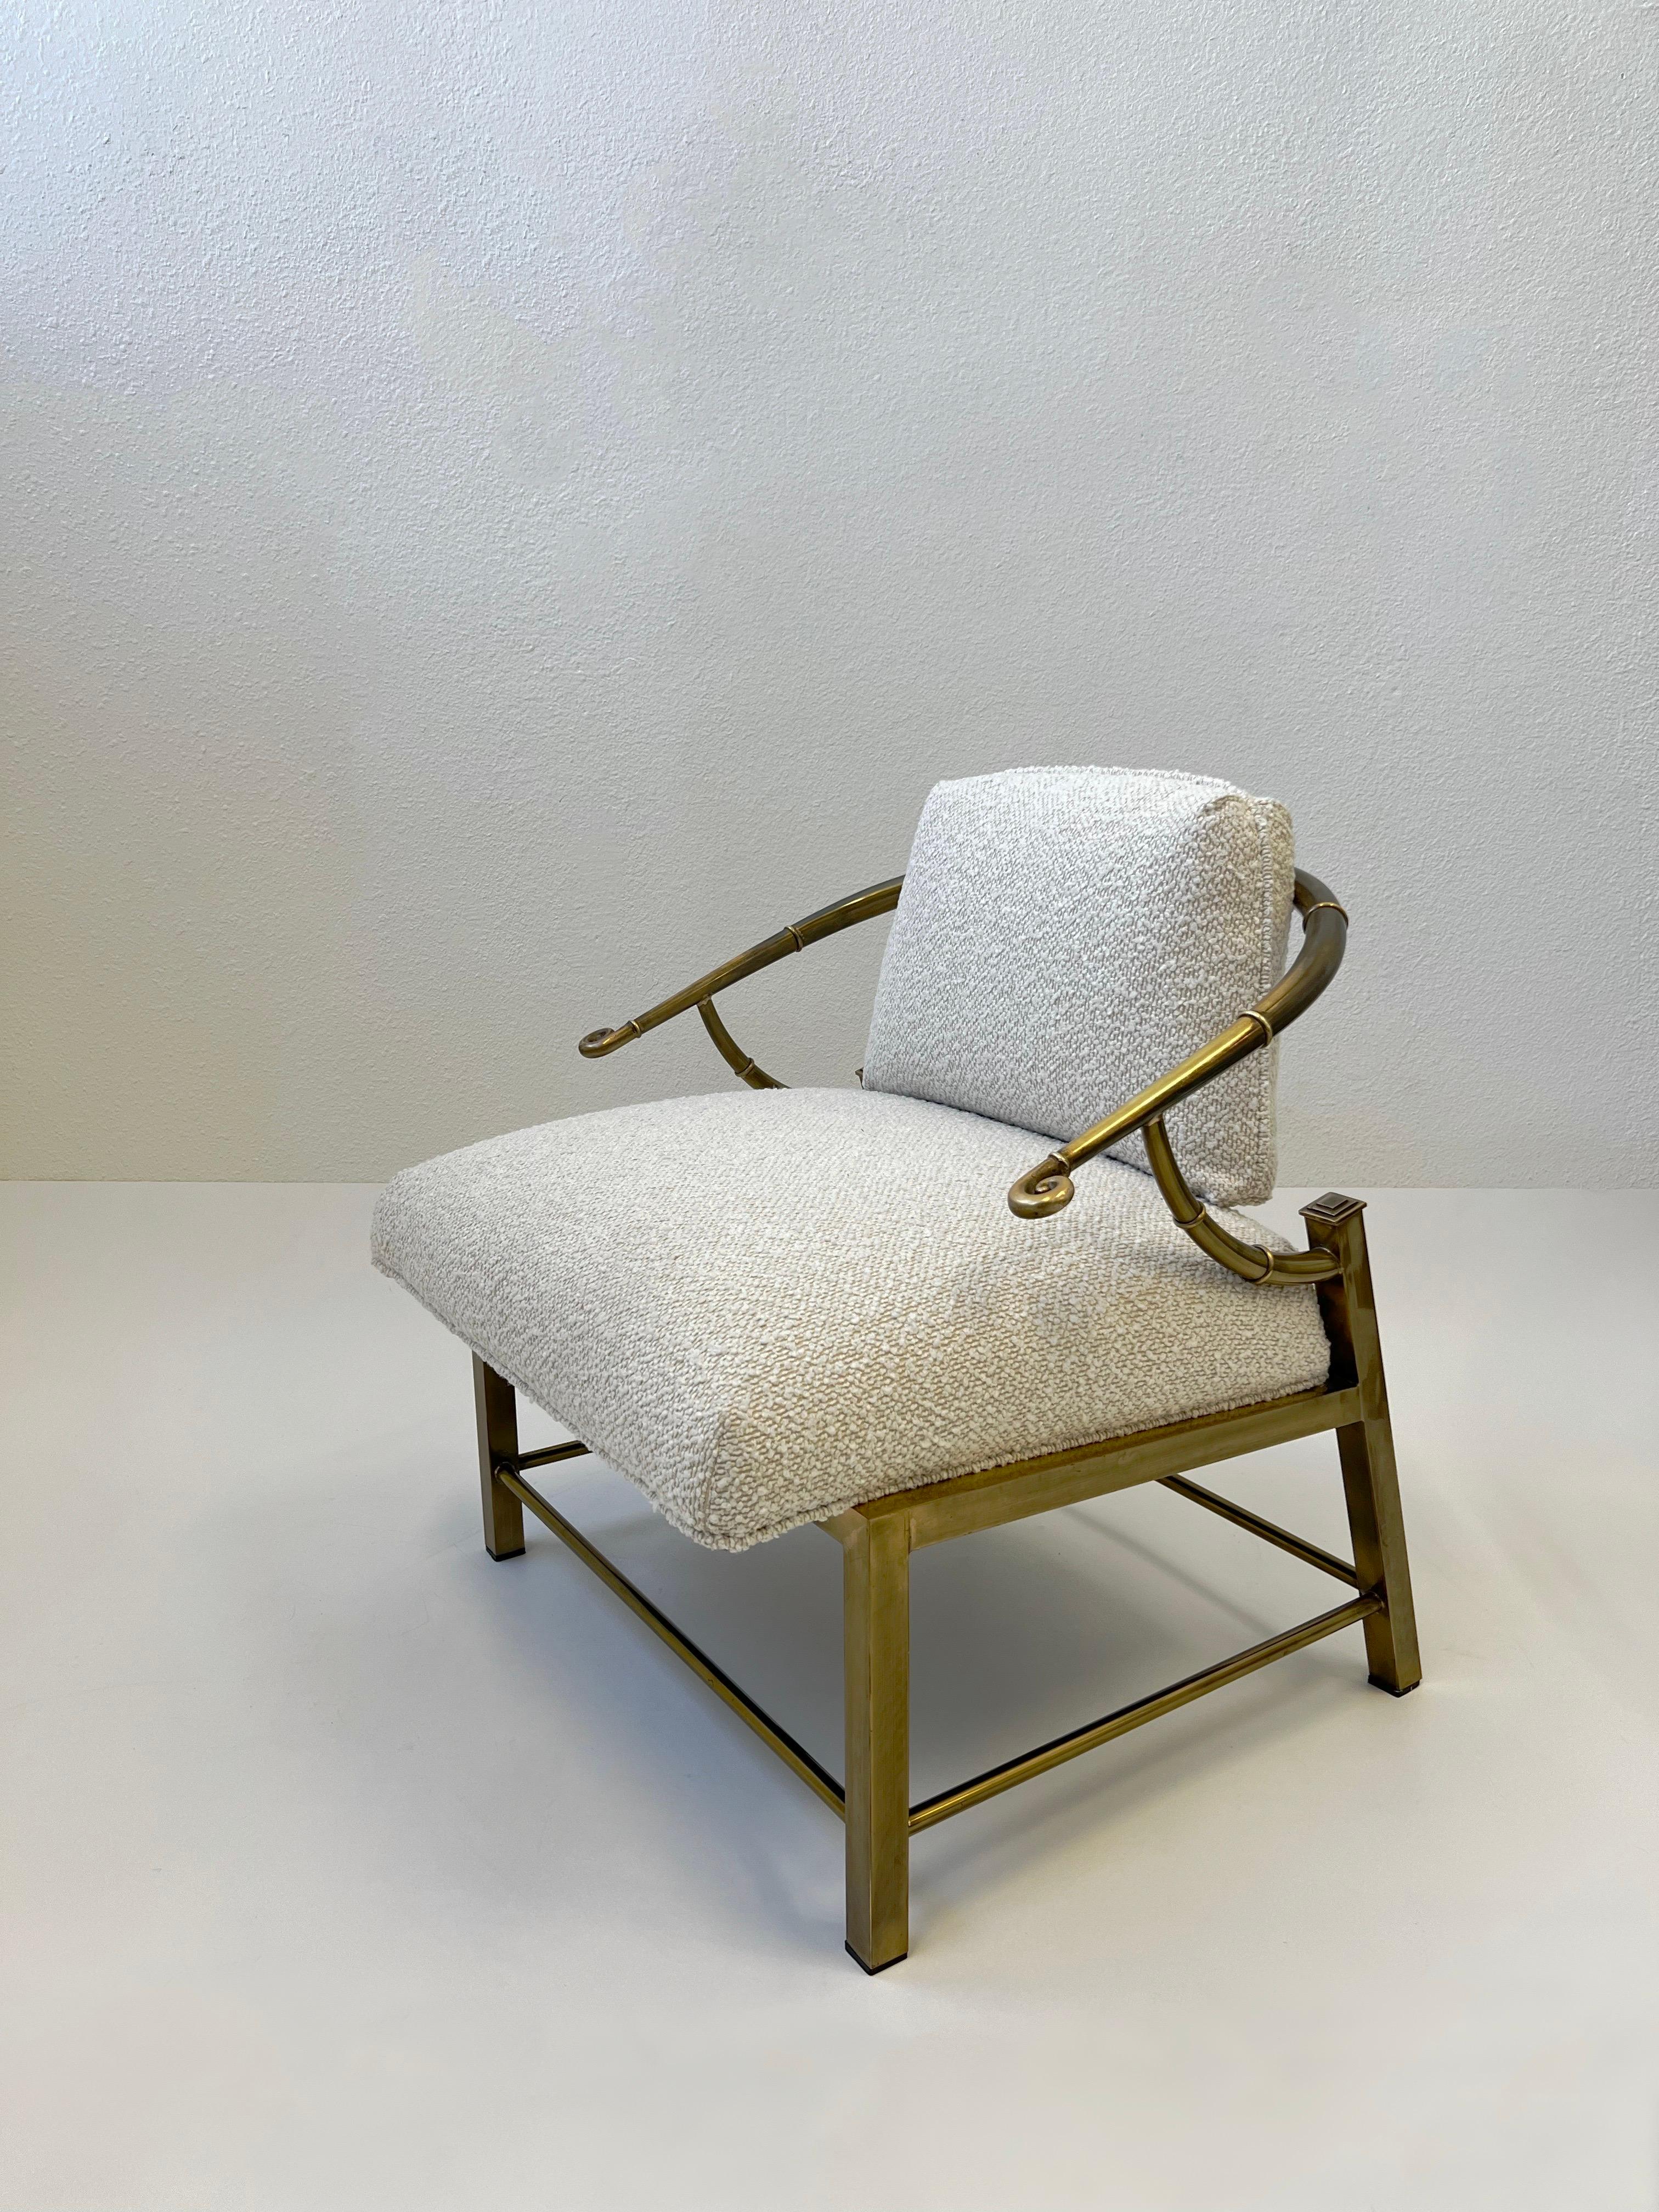 Pair of Aged Brass Lounge Chairs by Mastercraft In Good Condition For Sale In Palm Springs, CA